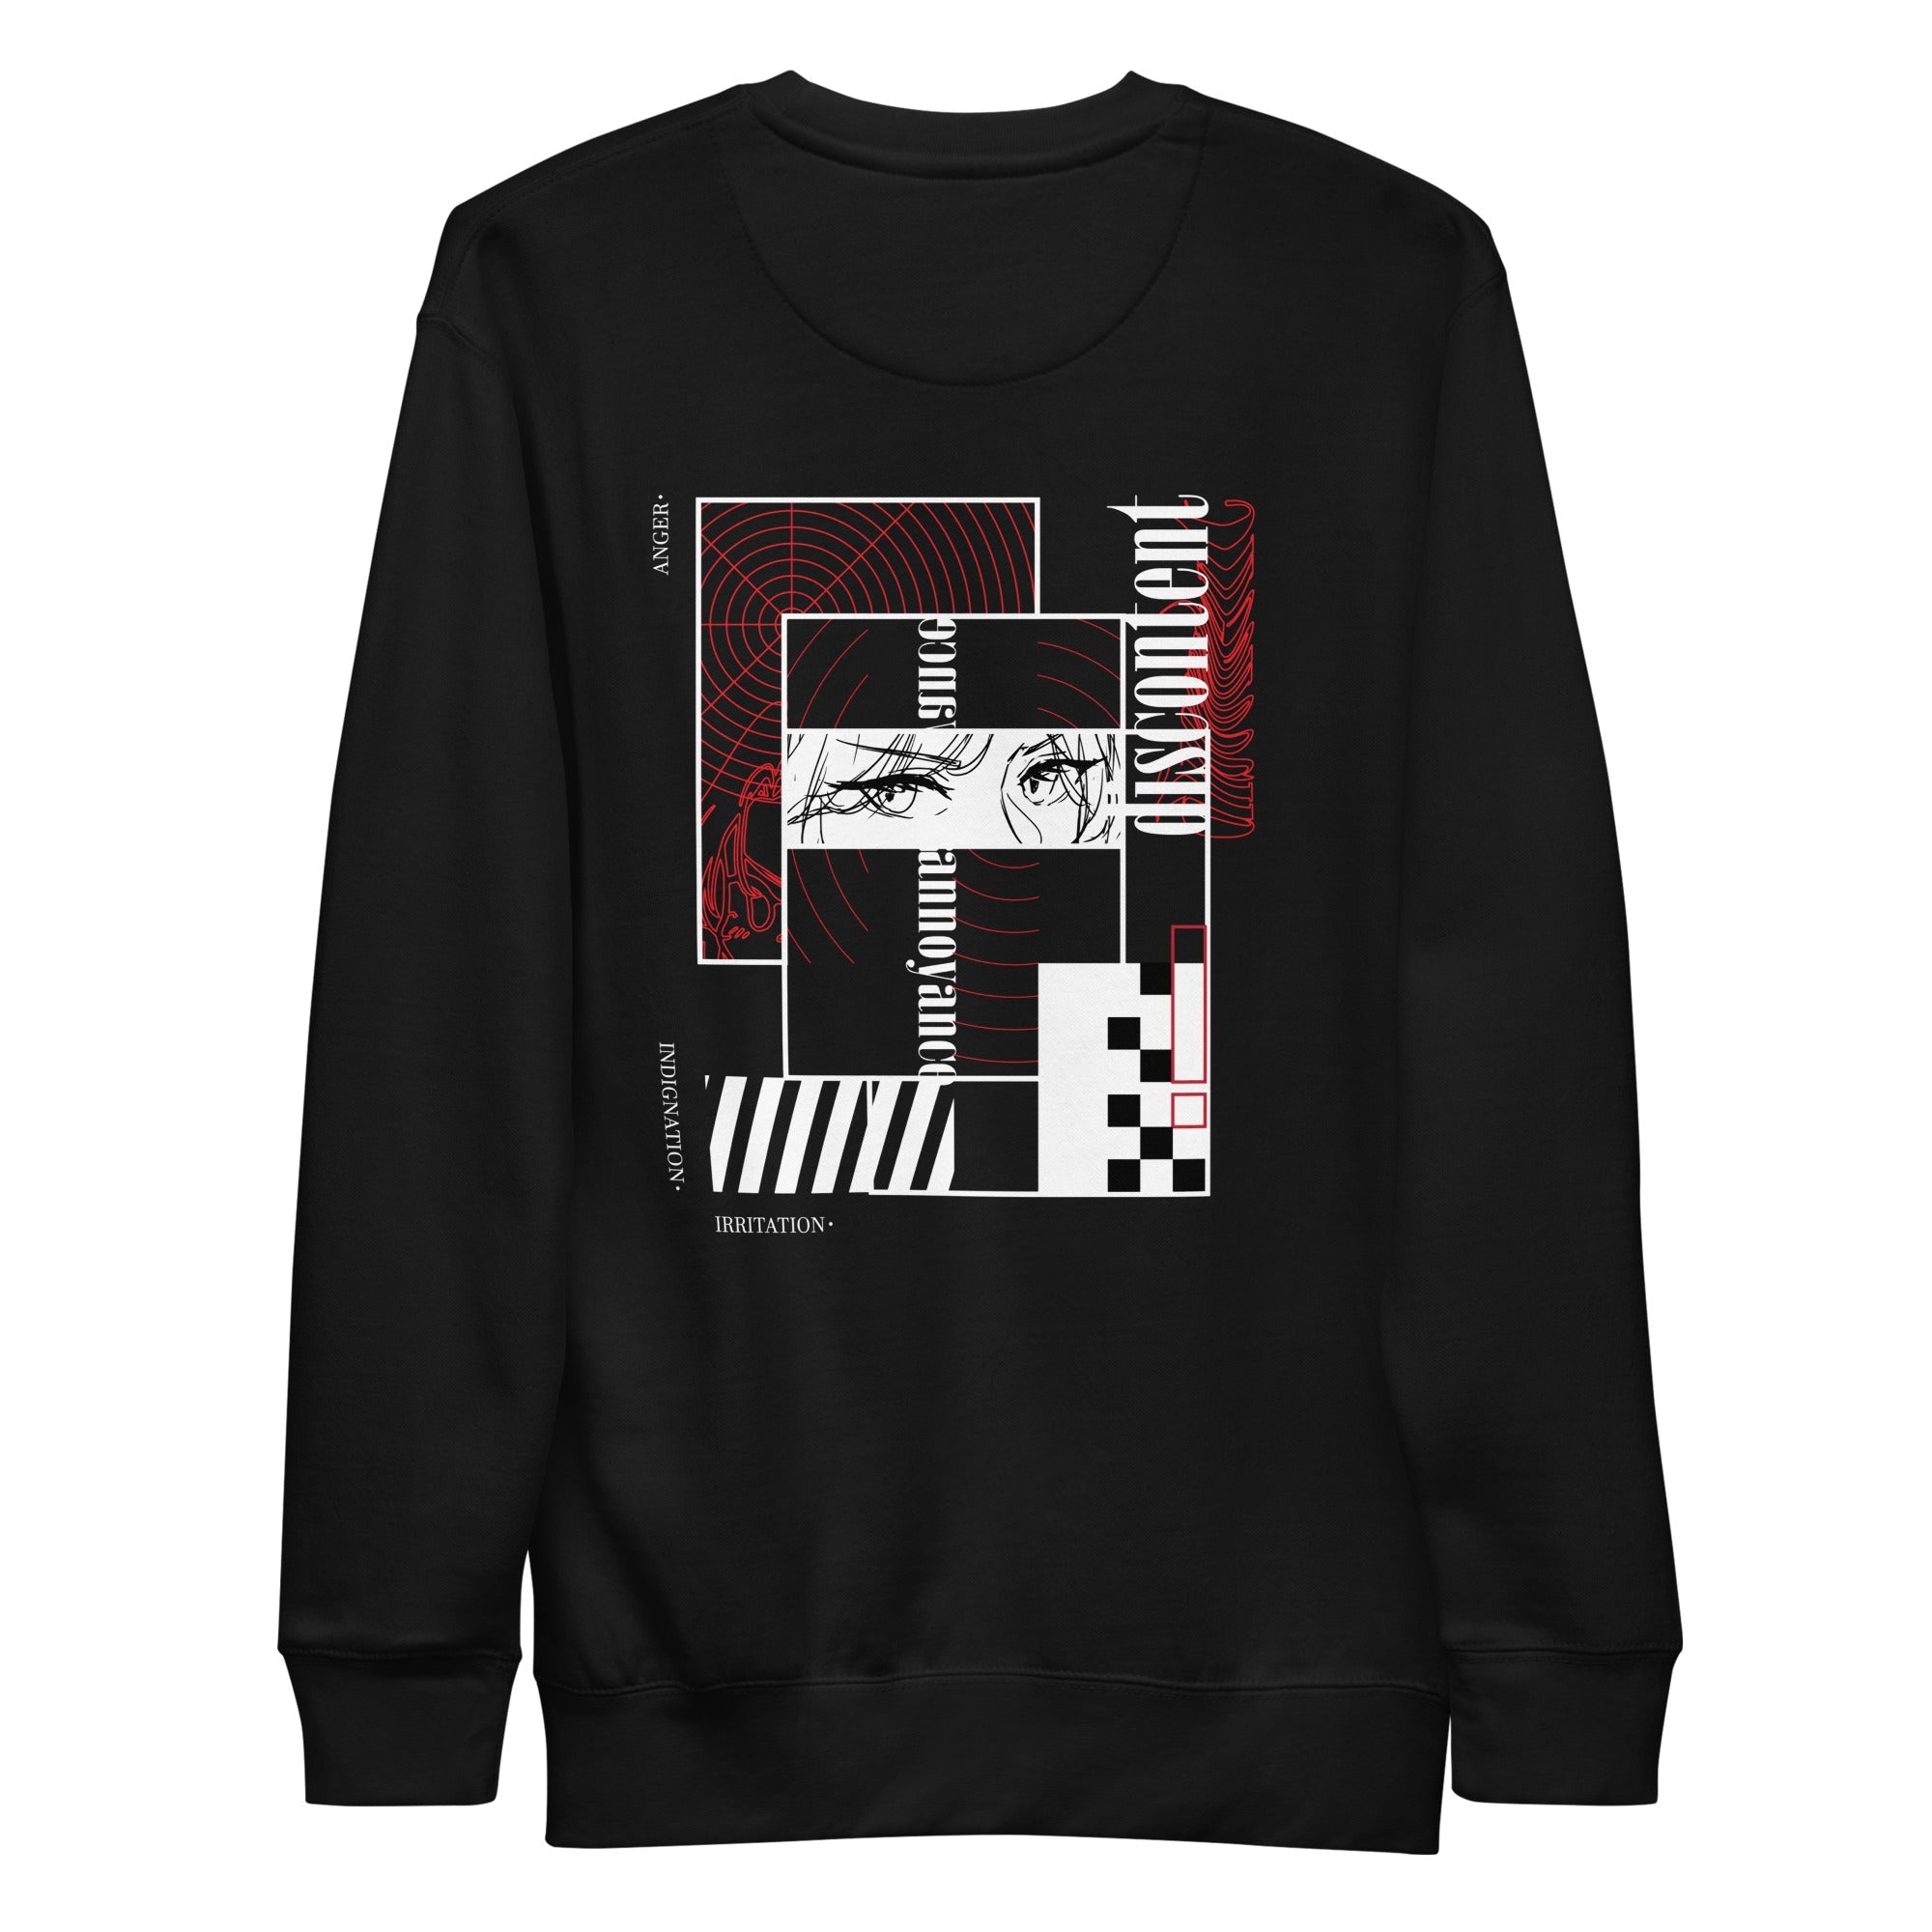 discontent - sketched • anime sweatshirt - Jackler - anime-inspired streetwear - anime clothing